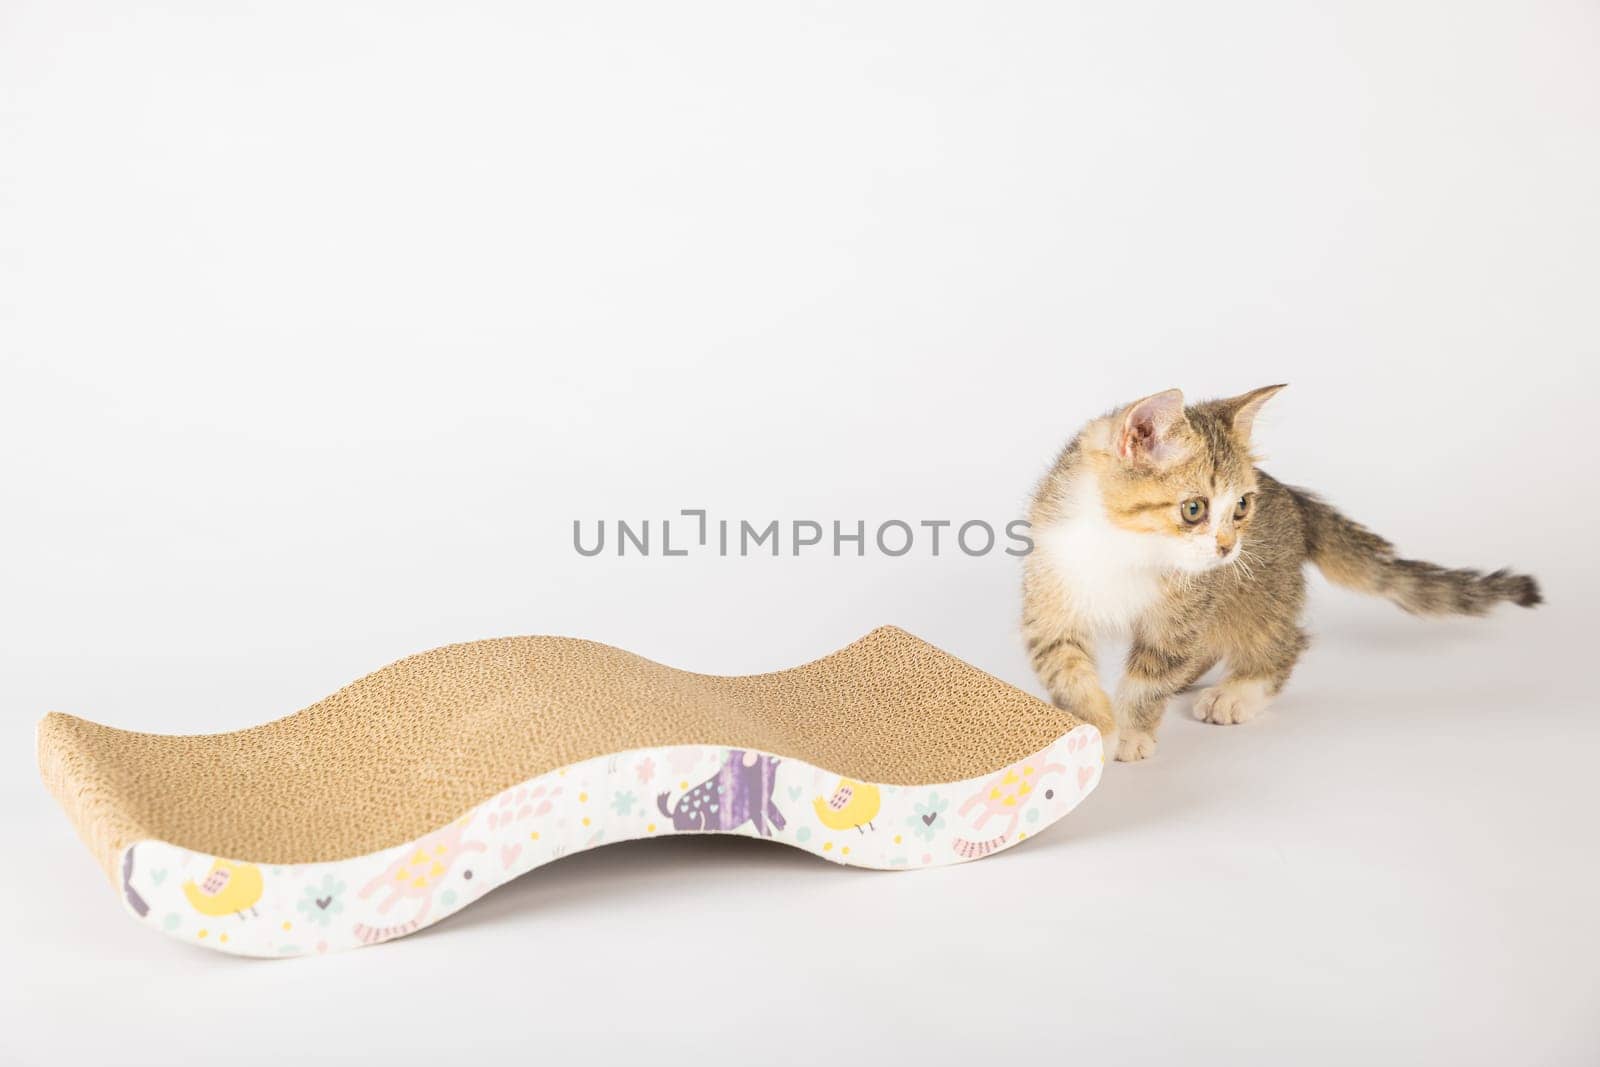 Every cat owner house modern cat scratching post also comfy lounge bed is made of corrugated cardboard on white background. The cat alertness and playful paw reveal its love for this feline furniture.